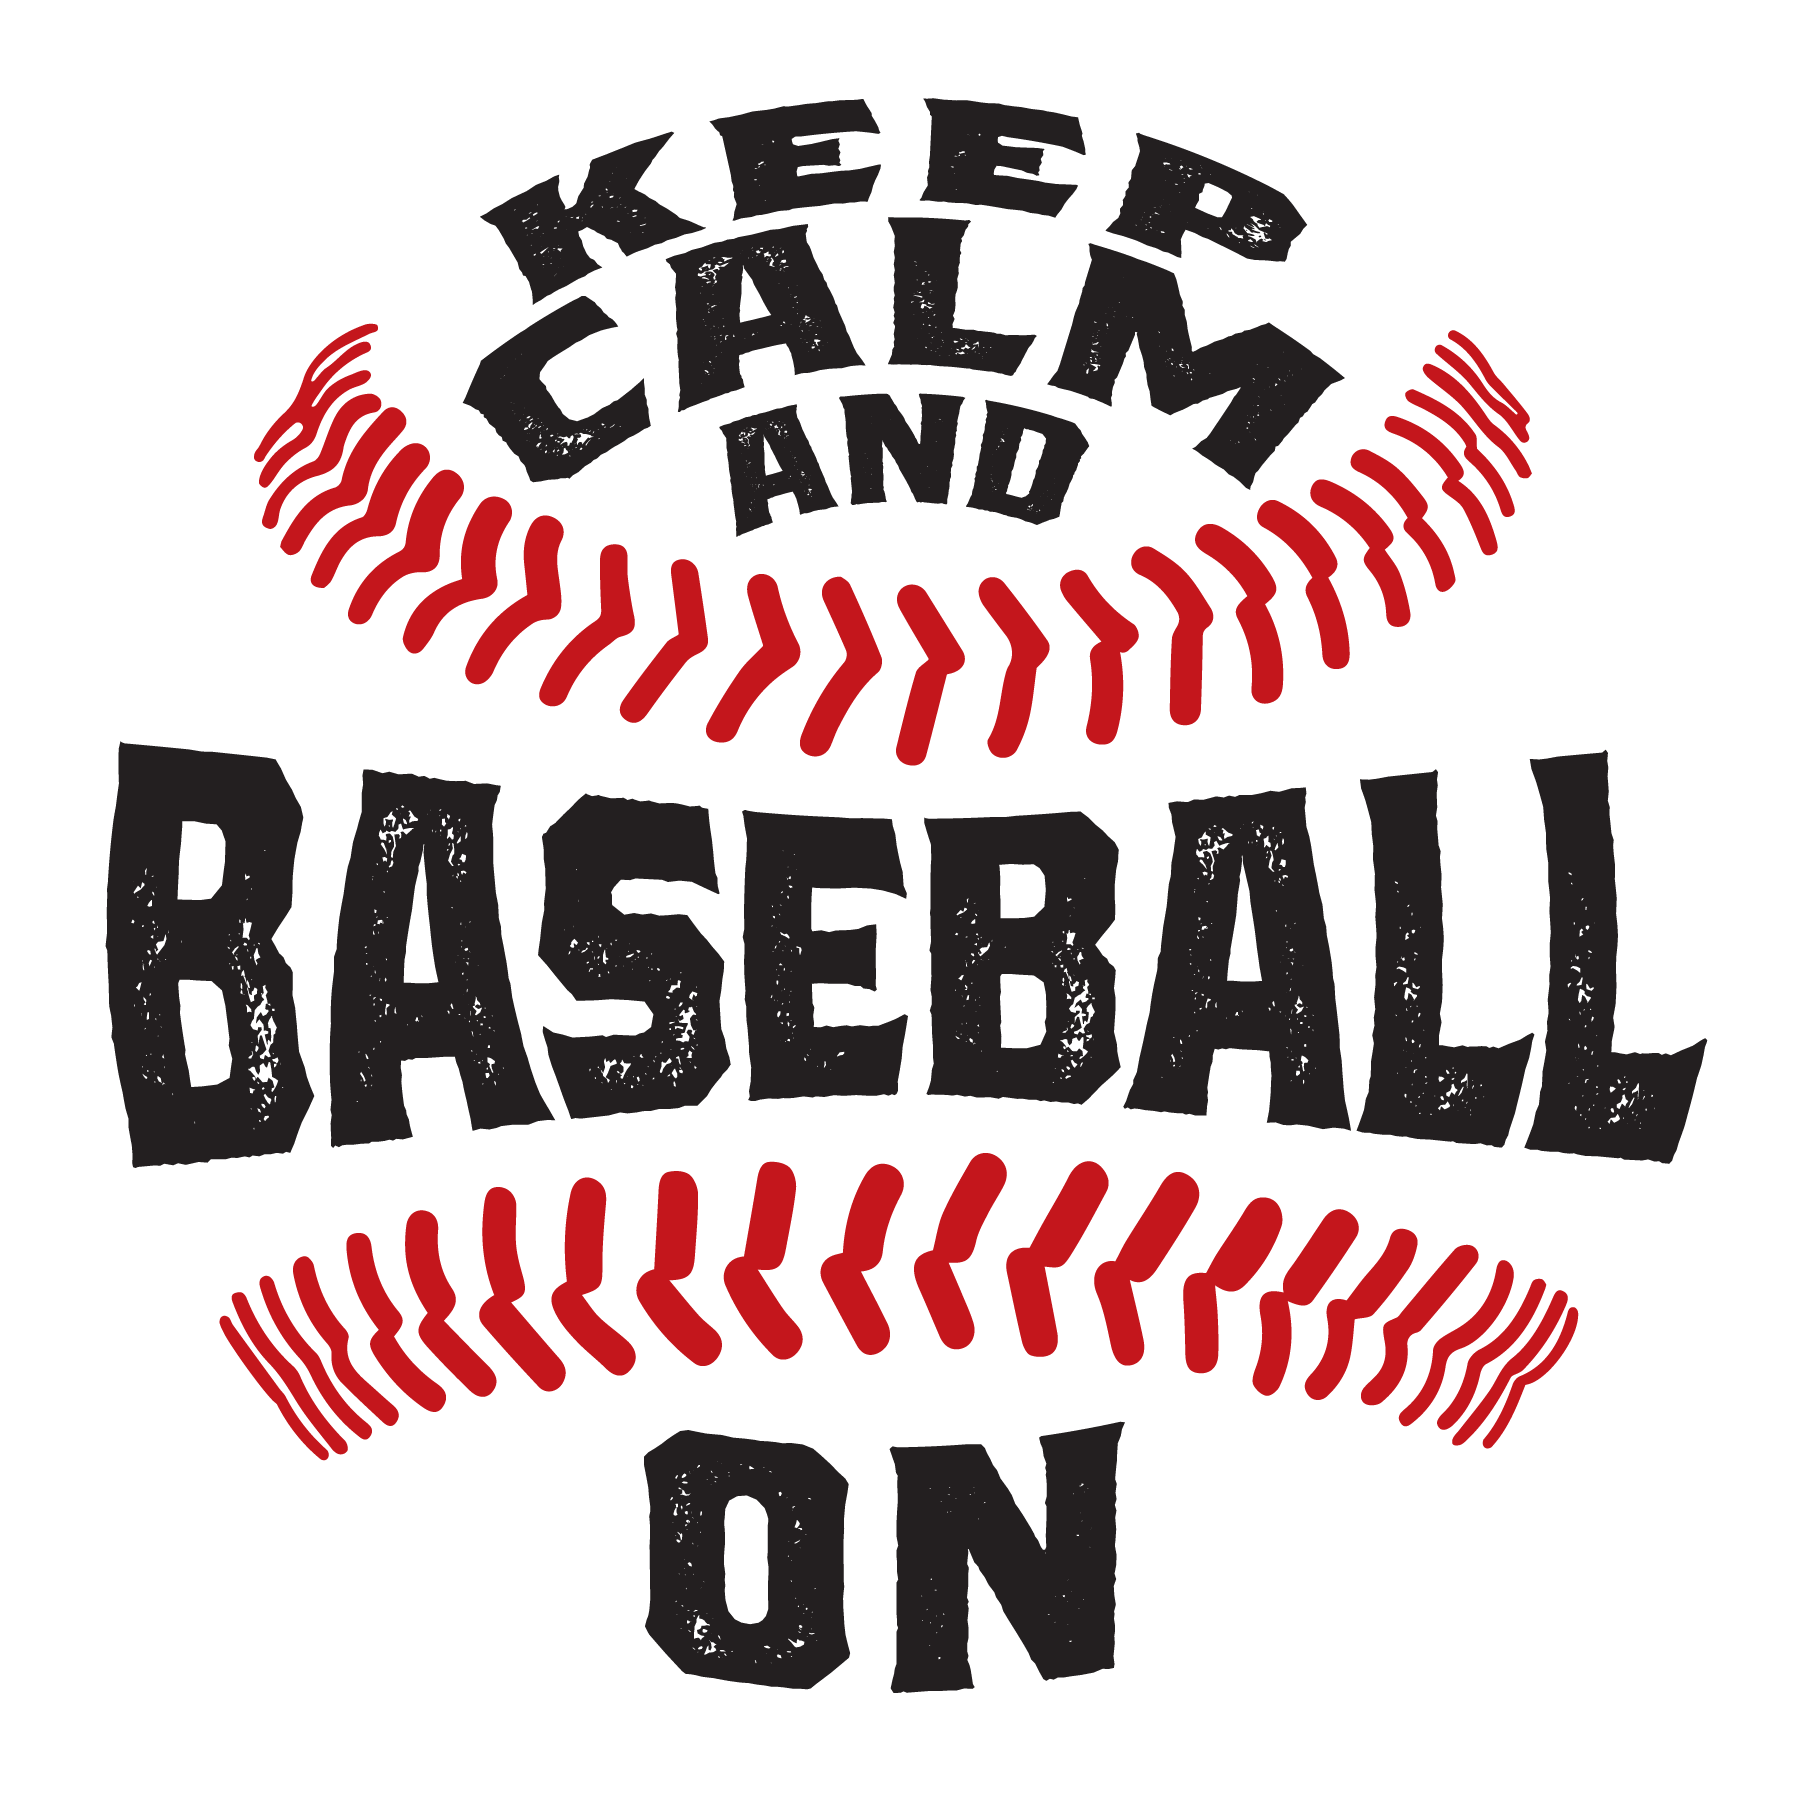 COPPELL CLASSIC - Hosted by Keep Calm & Baseball On Logo